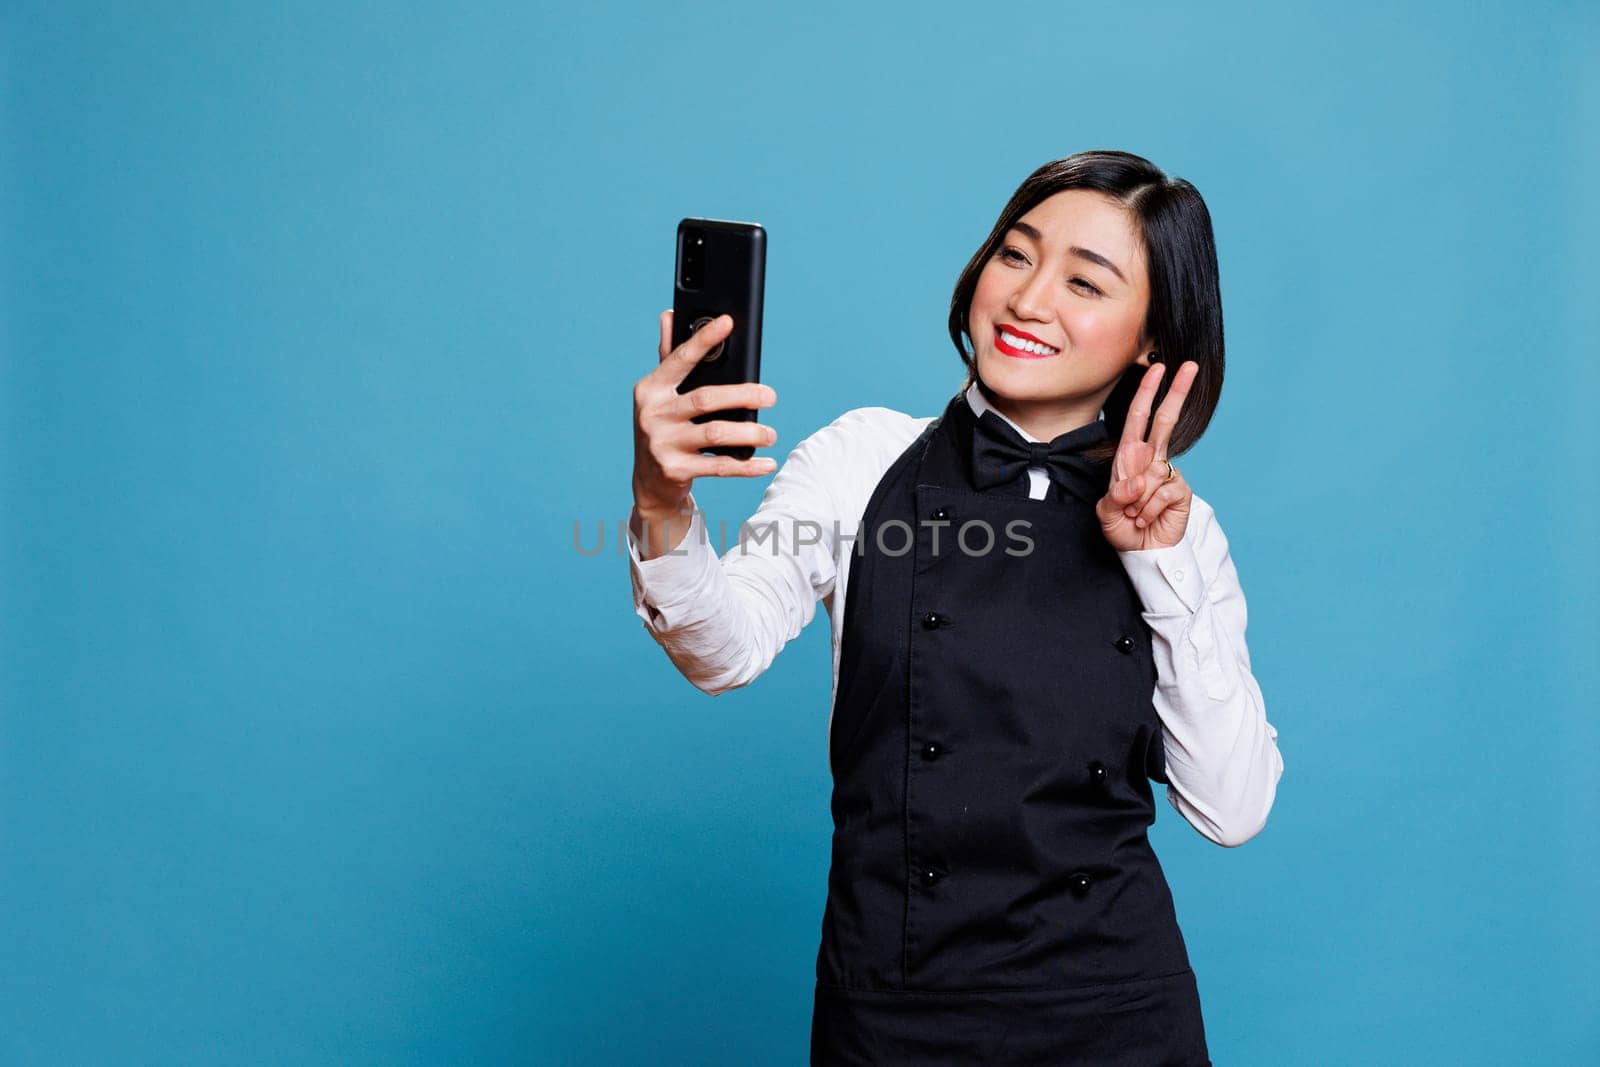 Smiling asian waitress holding smartphone, looking at front camera and showing peace symbol with fingers. Cheerful woman receptionist posing while taking selfie on mobile phone